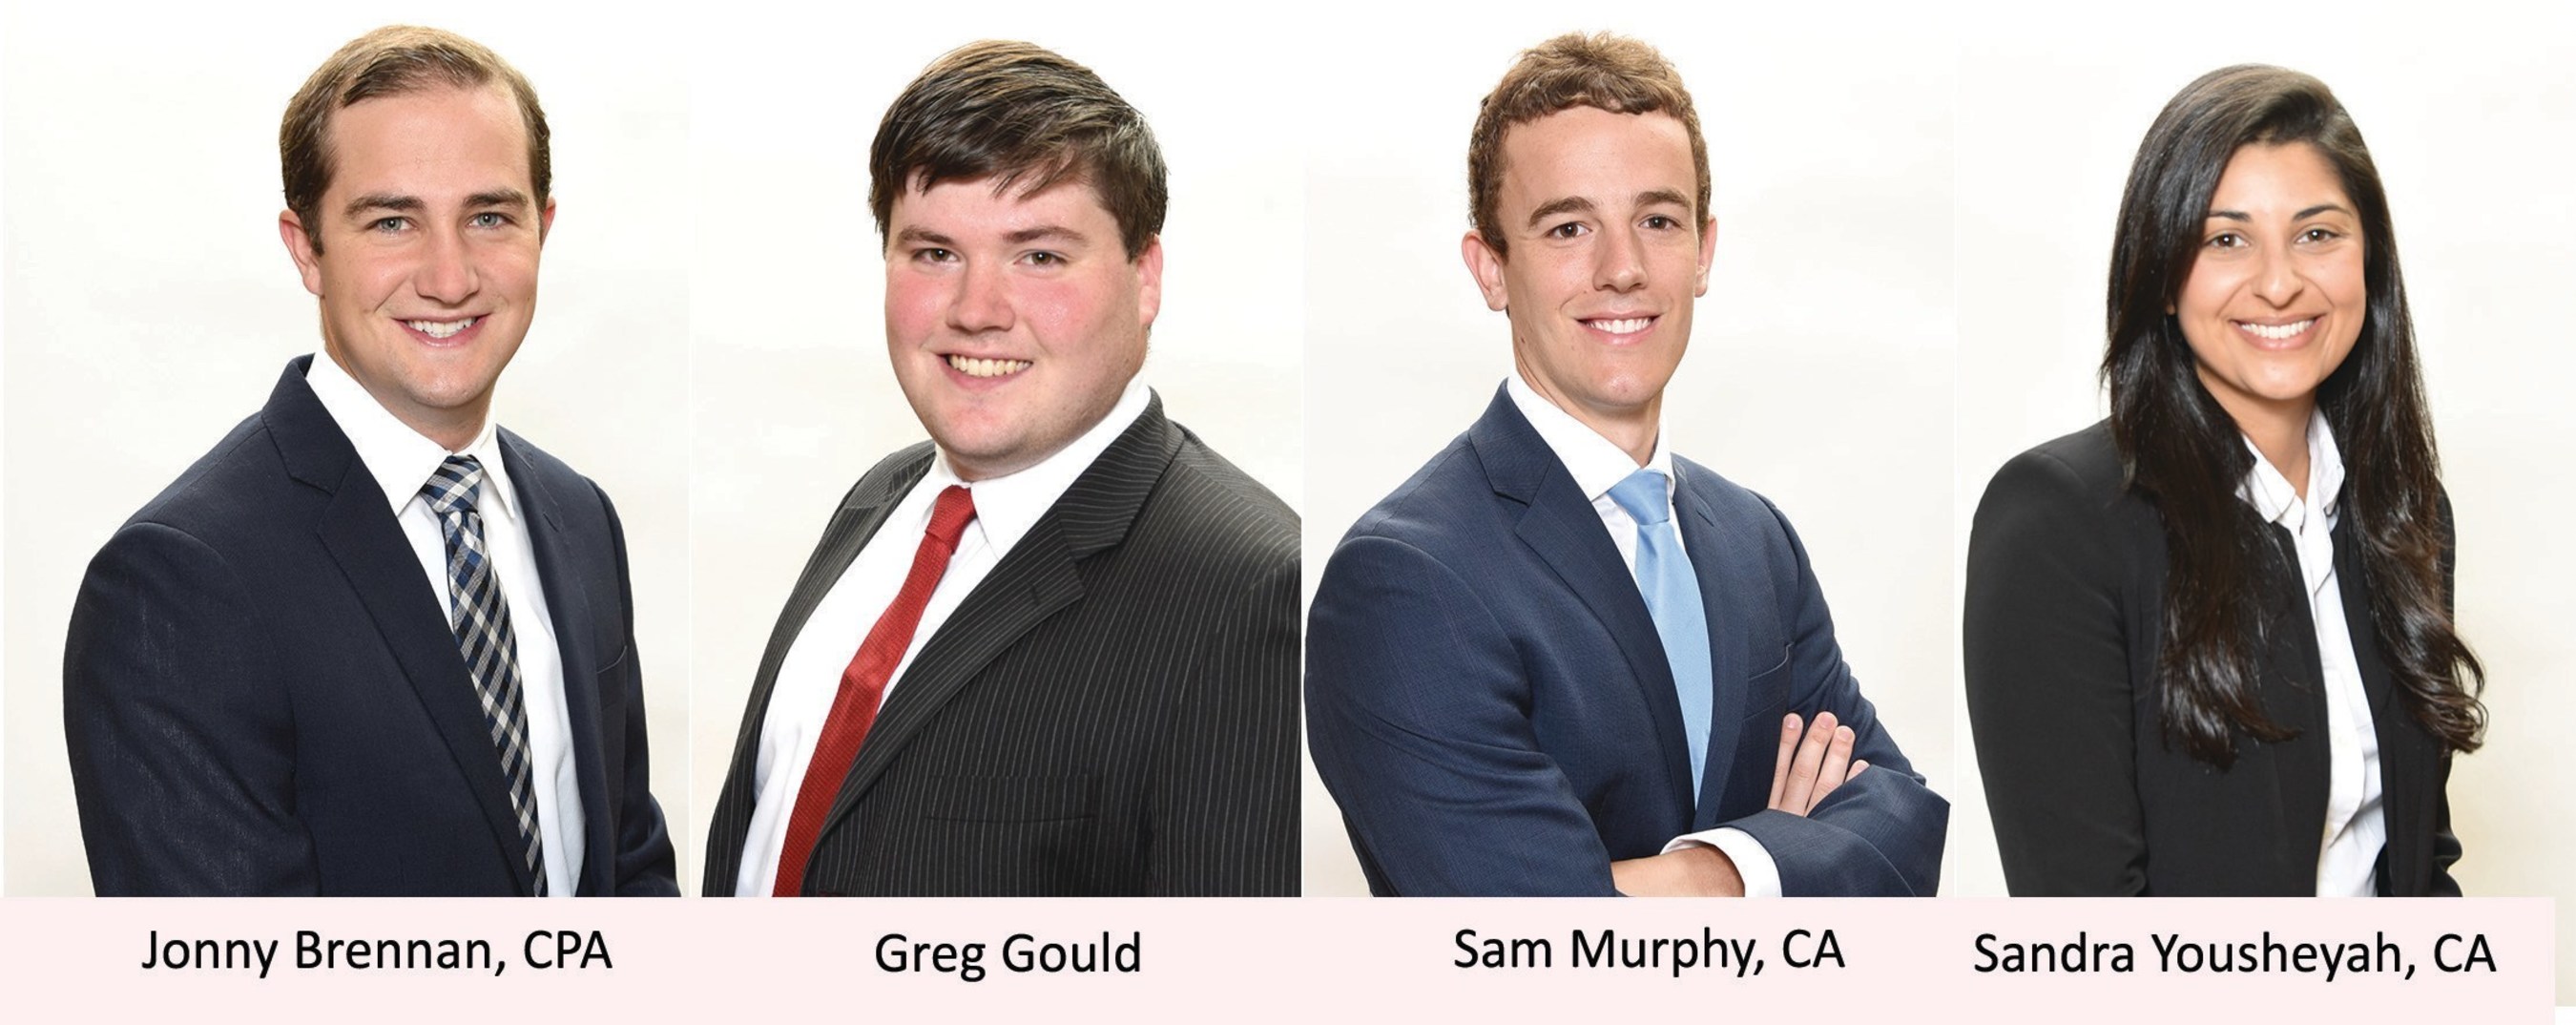 The Siegfried Group welcomes new professionals to its Northeast region